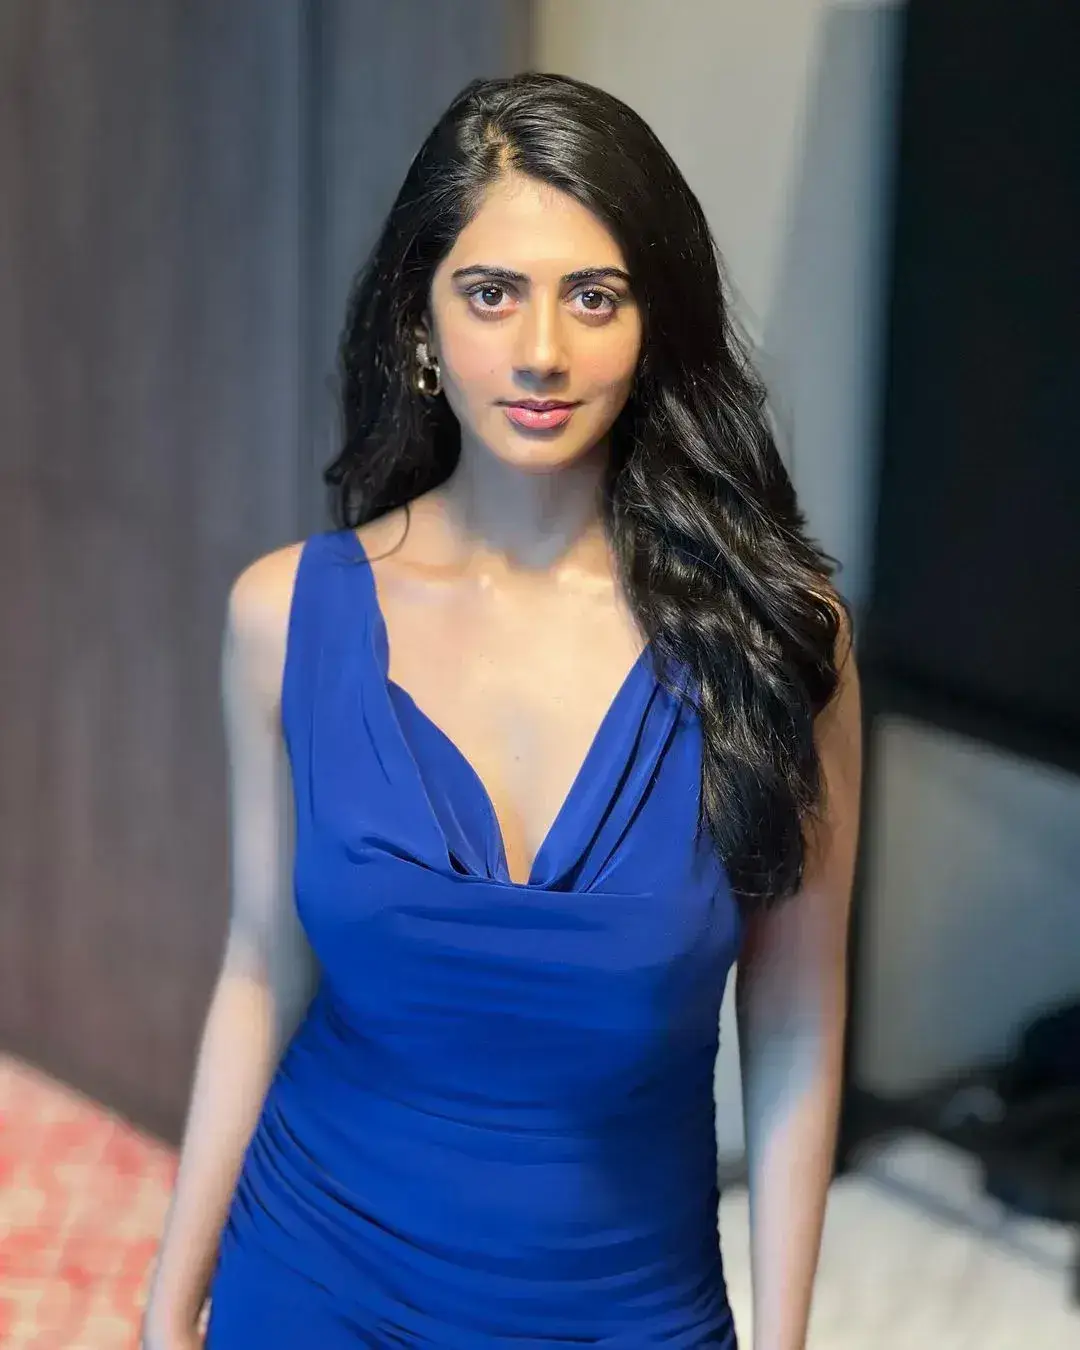 INDIAN ACTRESS GEHNA SIPPY PHOTOSHOOT IN BLUE DRESS 2